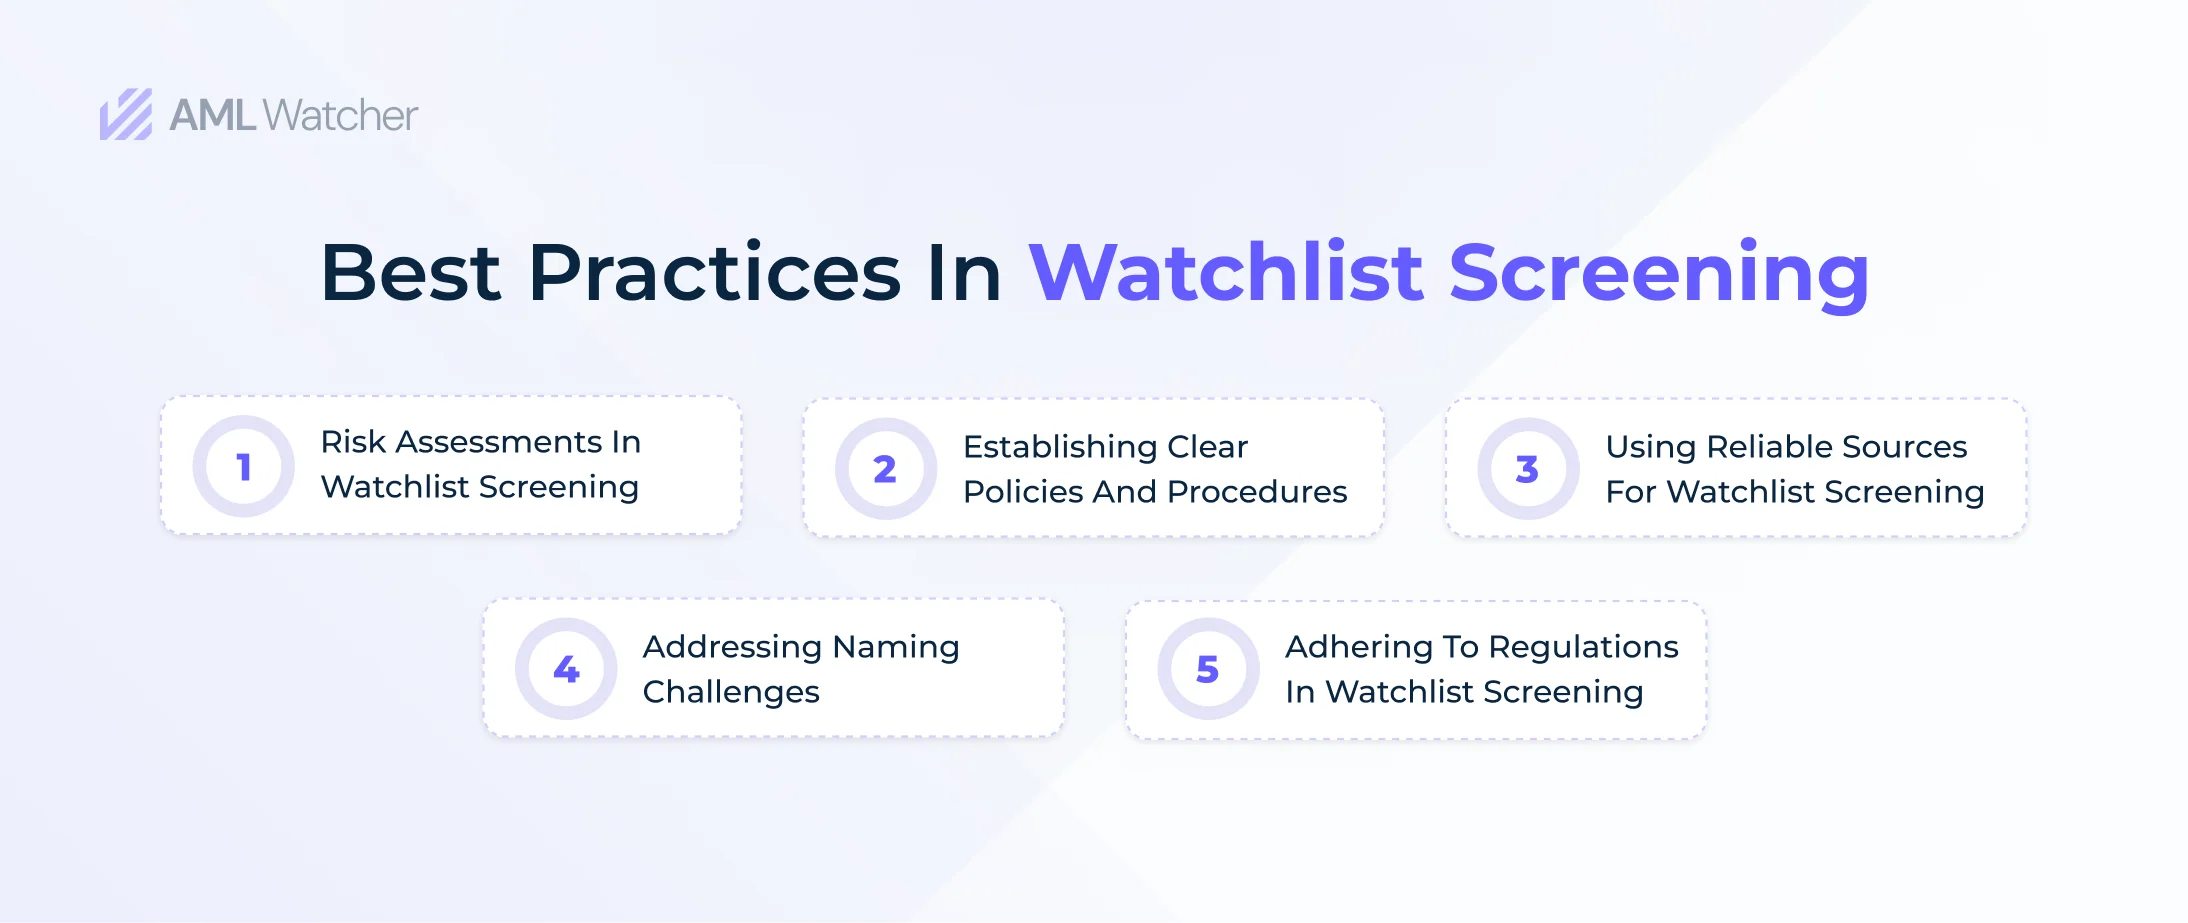 Organizations employ the solutions or best practices to overcome the challenges embedded in watchlist screening procedures.